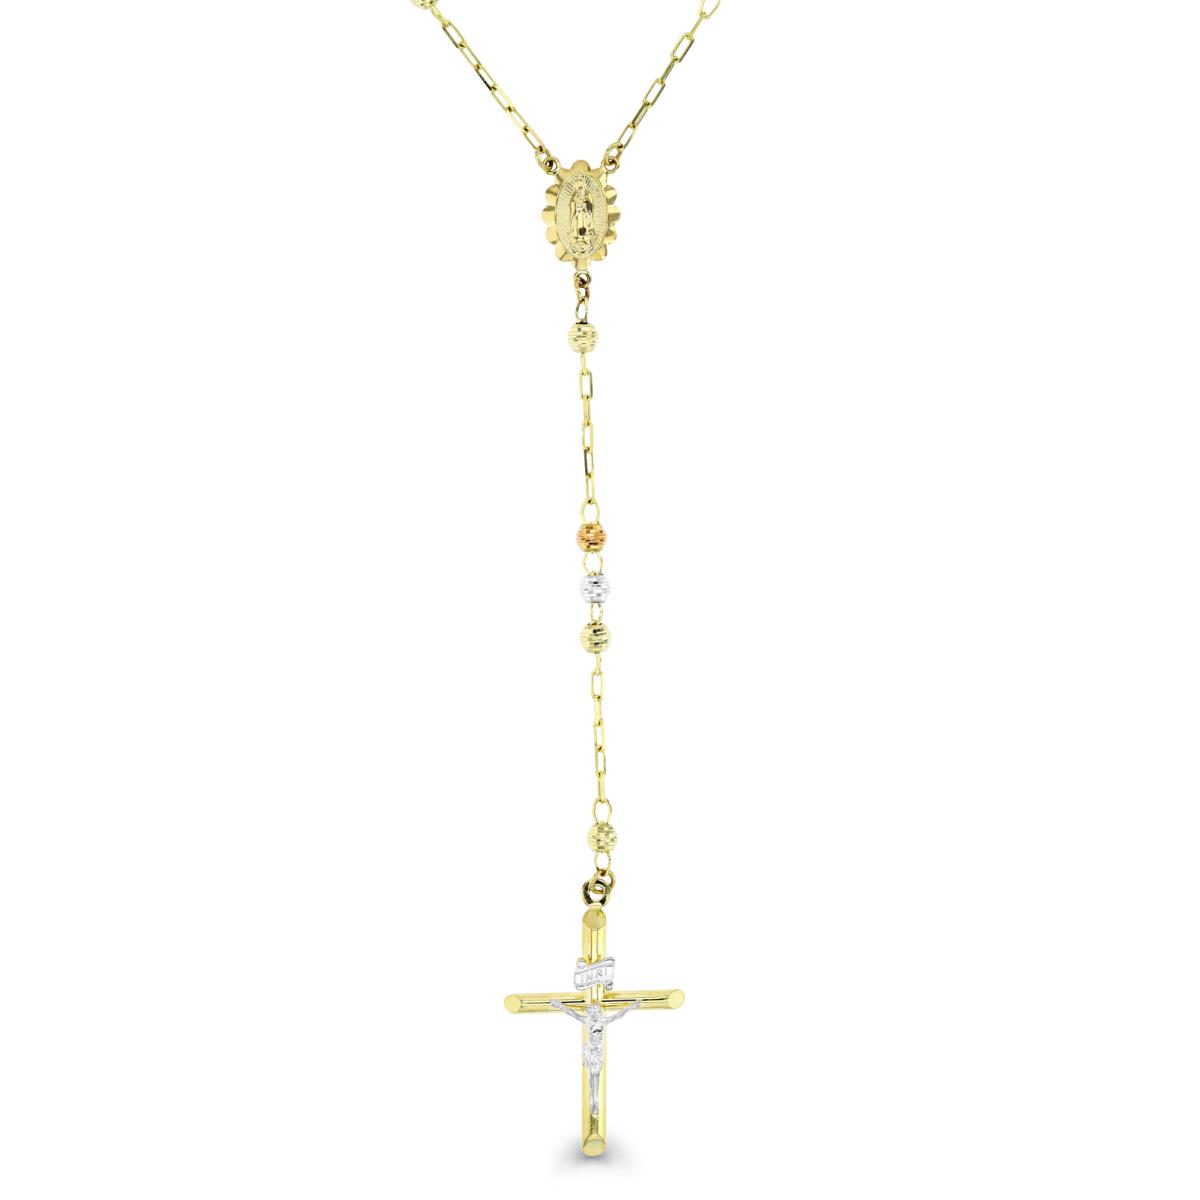 14K Gold Tricolor 4MM Disco Beads Rosary Necklace